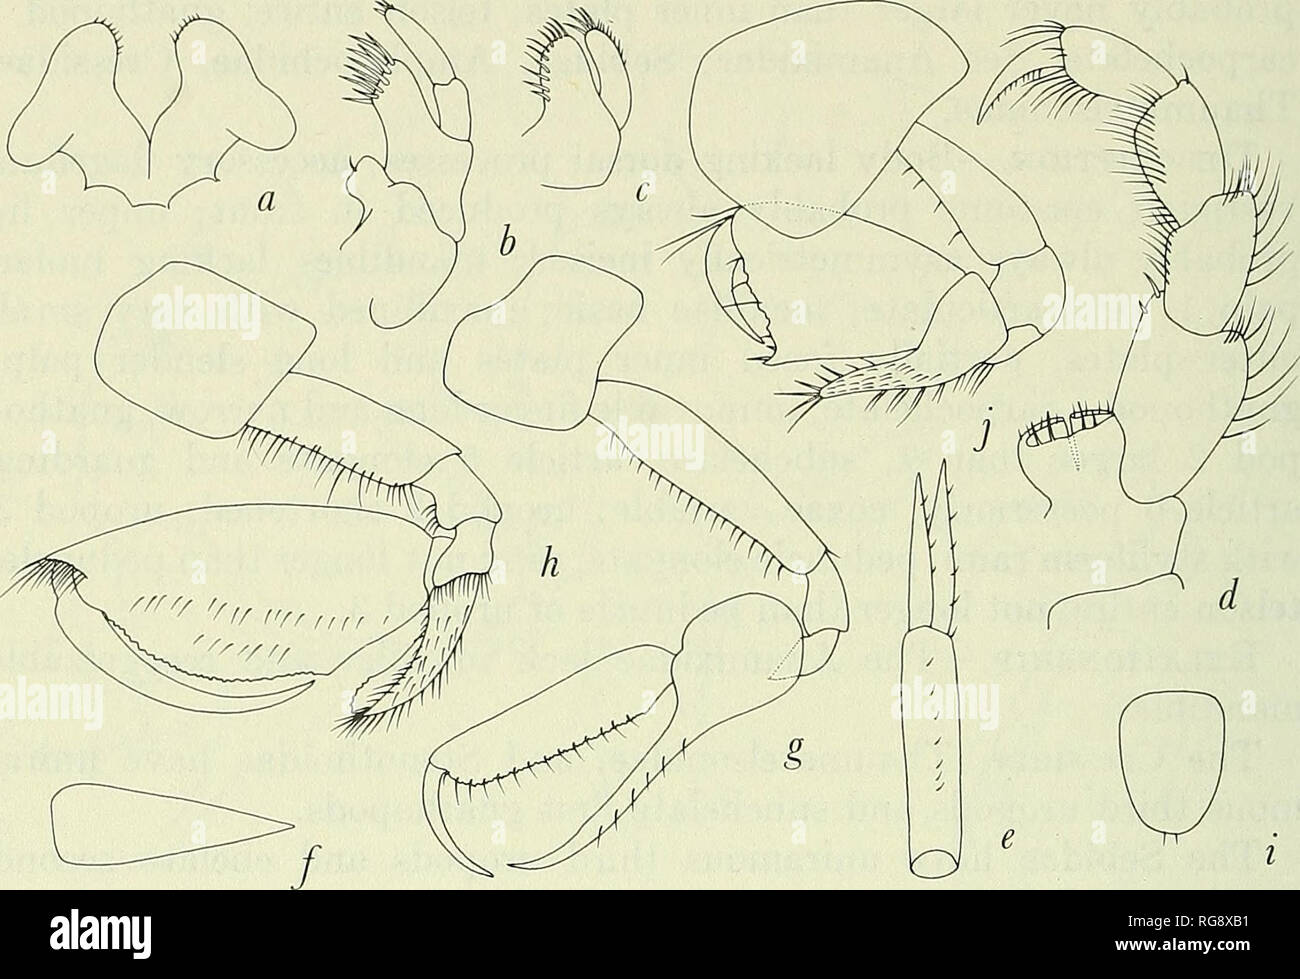 . Bulletin - United States National Museum. Science. 290 U.S. NATIONAL MUSEUM BULLETIN 271 Coxa 2 at least as long as broad, rounded ventrally and anteriorly, coxa 1 not concealed; mandibular palp 3-articulate; outer plate of maxilliped reaching less than halfway along palp article 1. Species: 25, cosmopolitan, littoral to abyssal.. Figure 114.—Leucothoidae: Leucothoe spinicarpa (Abildgaard) (Sars, 1895, pi. 100): a, lower lip; b,c, maxillae 1, 2; d, maxilliped; e, uropod 3;/, telson; g,h, gnathopods 1, 2. Leucothoides pottsi Shoemaker (1933a): i, telson;;, gnathopod 2. Leucothoella Schellenbe Stock Photo